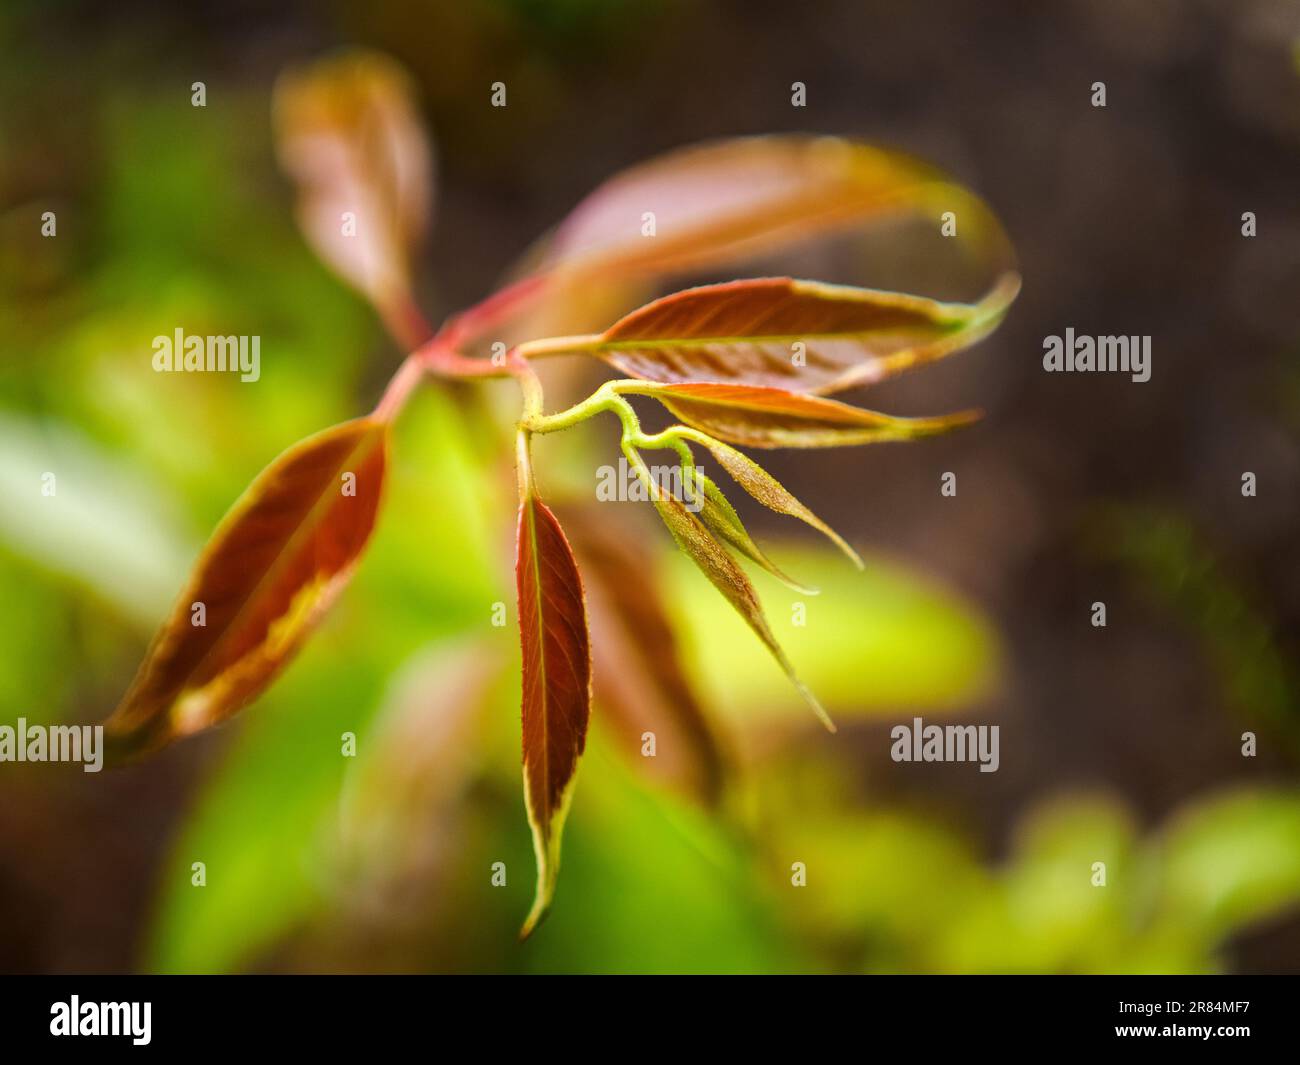 tiny plant twig with small leaves, beauty in nature, close up photo Stock Photo